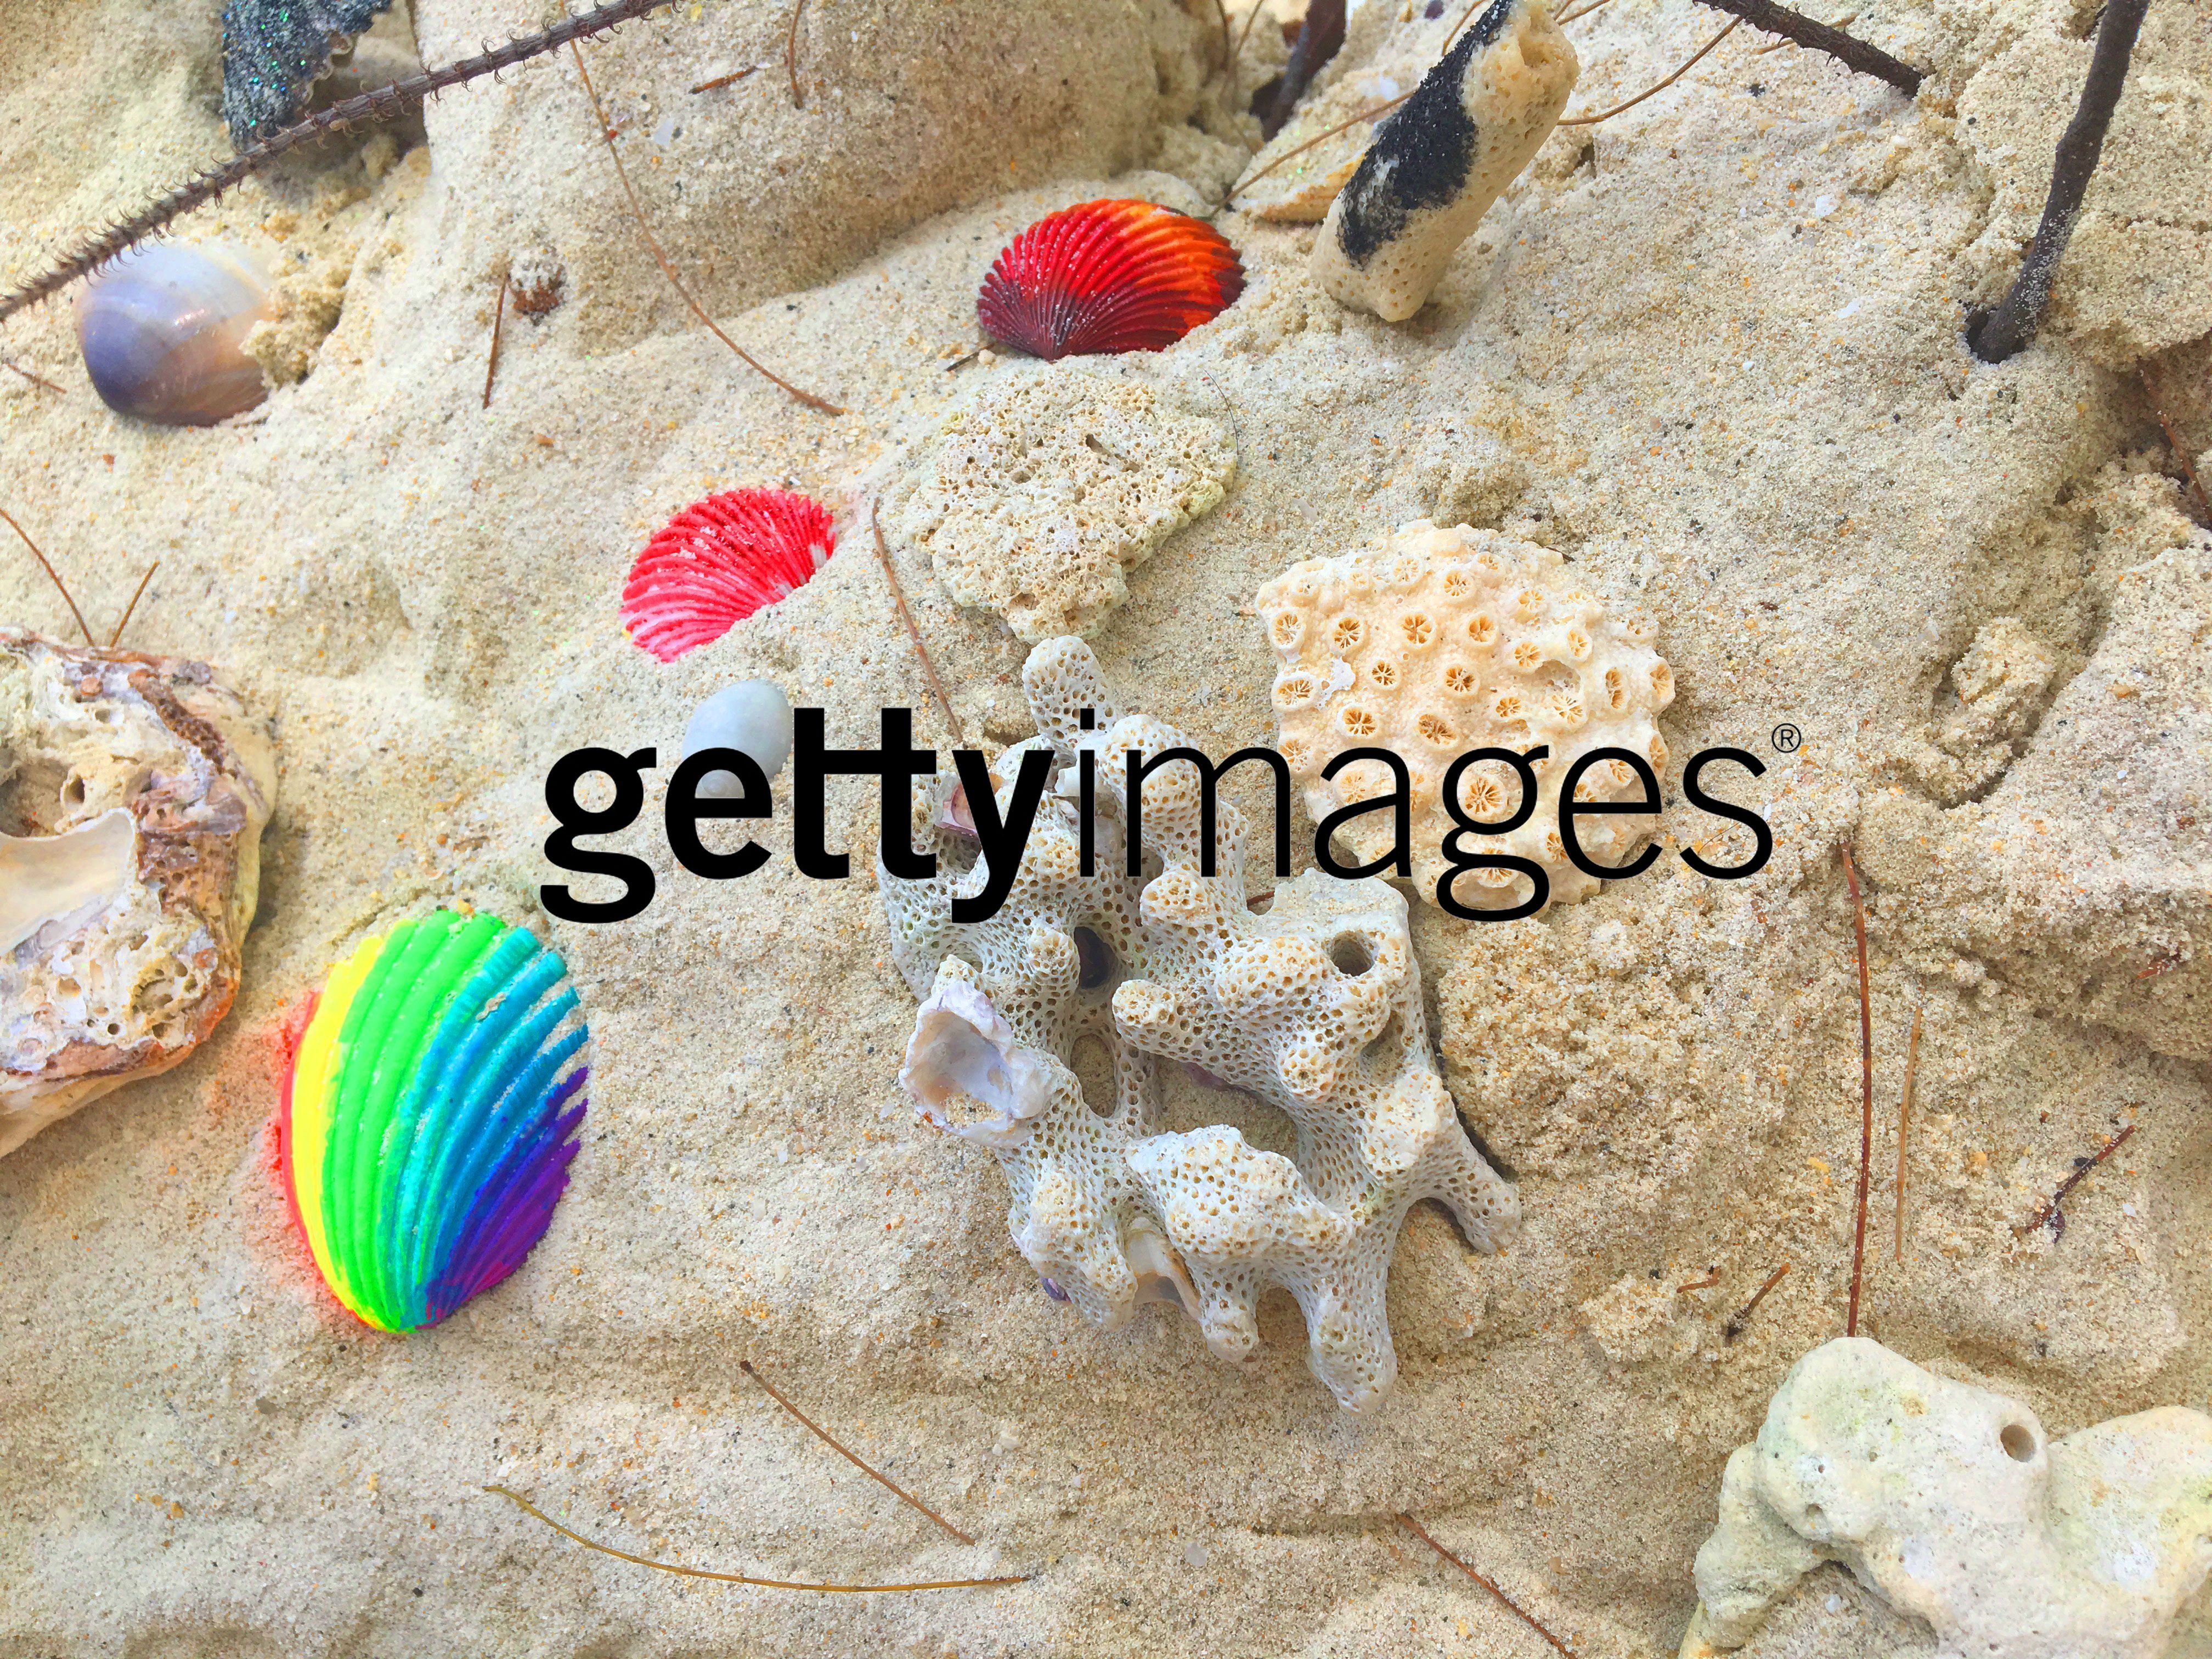 How to Remove Watermark from Getty Images